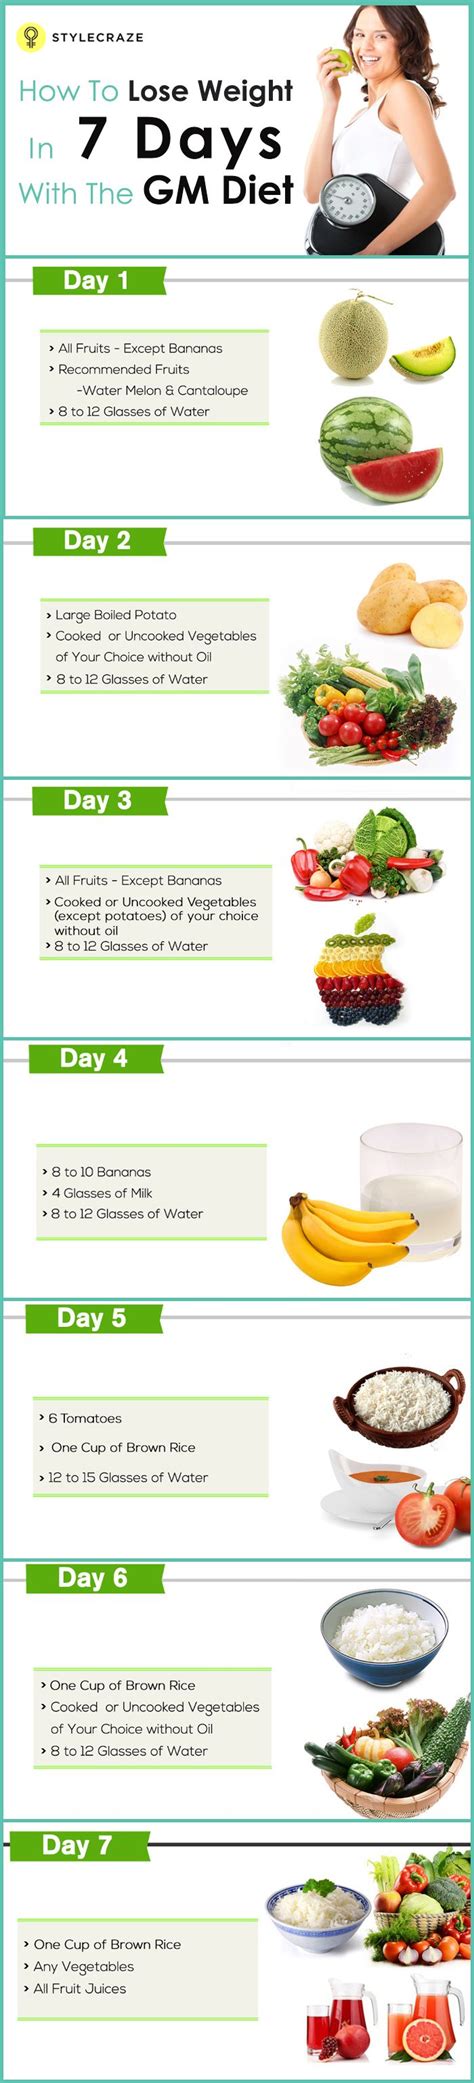 13 8 Days Weight Loss Diet Plan 2022 Healthy Beauty And Fashions